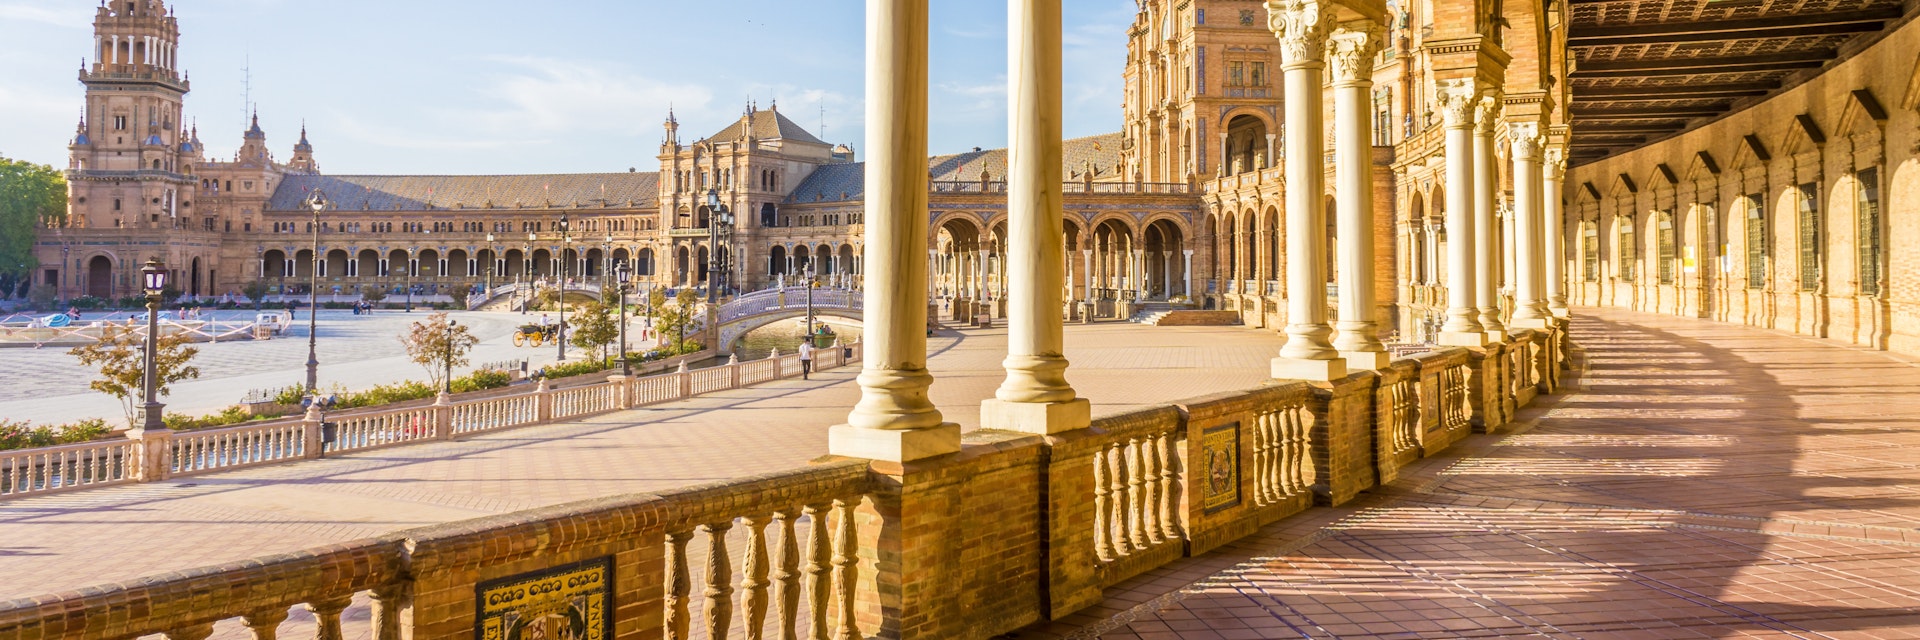 Spain Square (Plaza de Espana), Seville, Spain, built on 1928, it is one example of the Regionalism Architecture mixing Renaissance and Moorish styles.